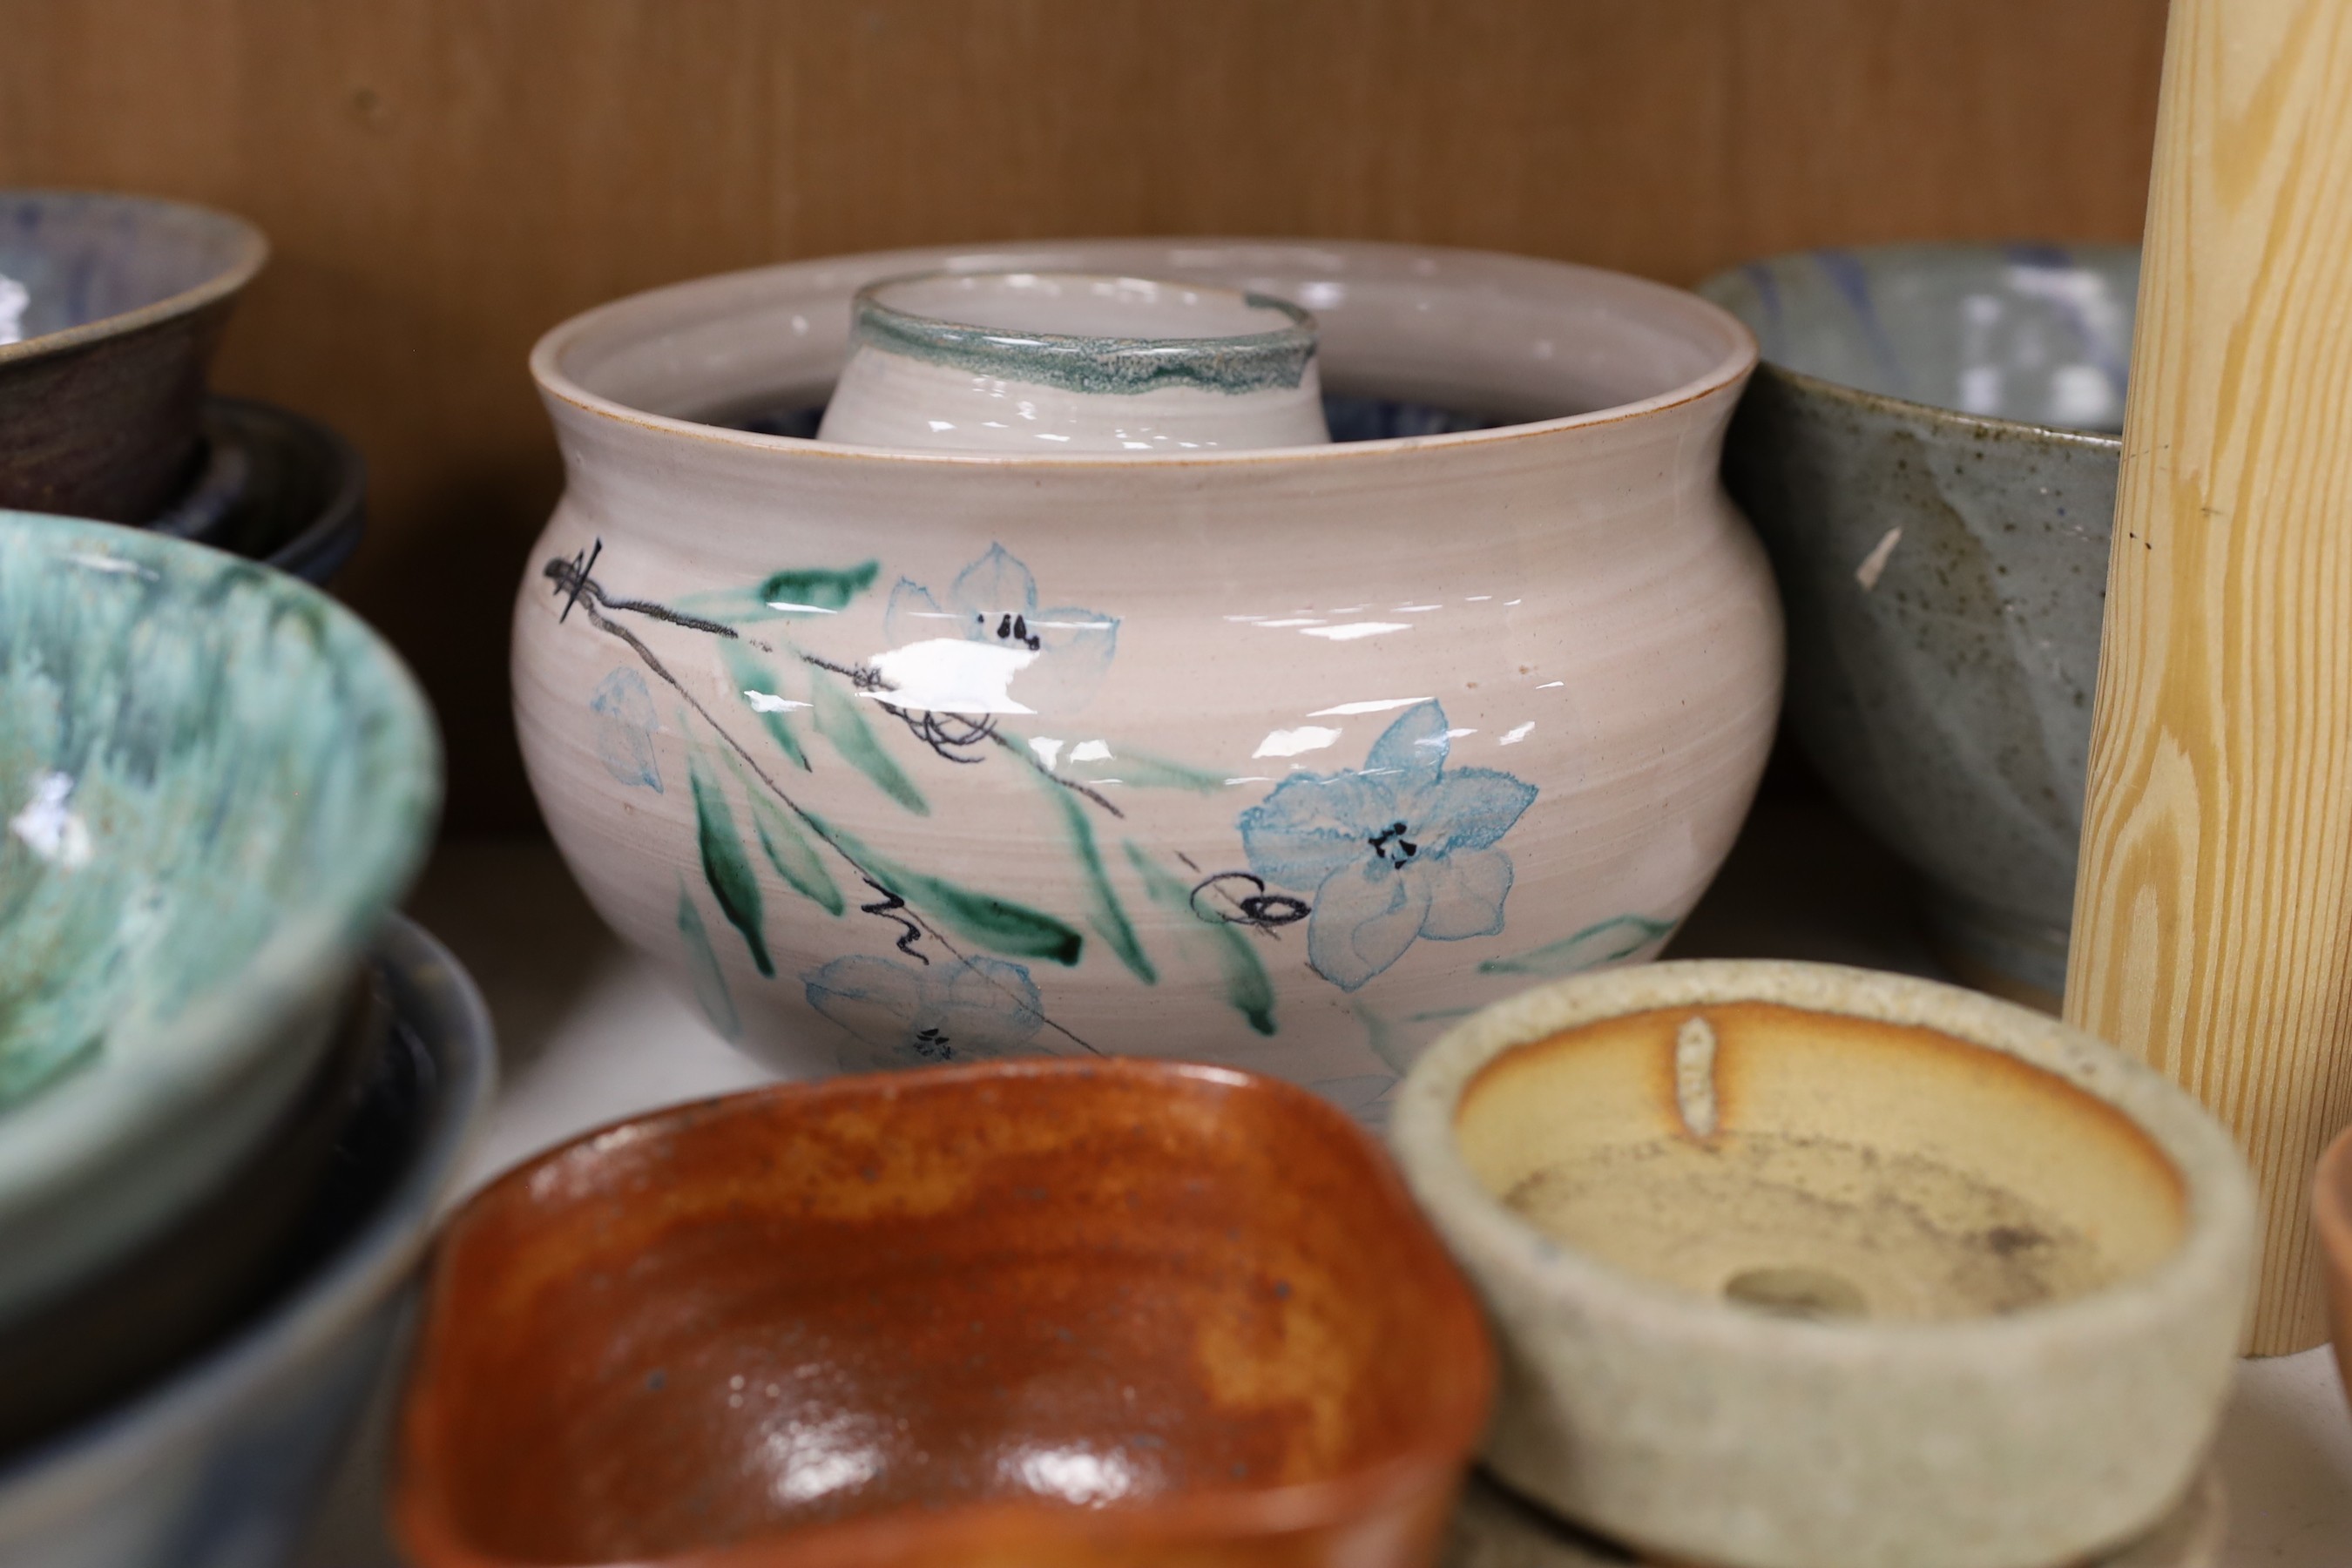 A large quantity of British studio pottery bowls and dishes, to include a vast amount by Susan Threadgold